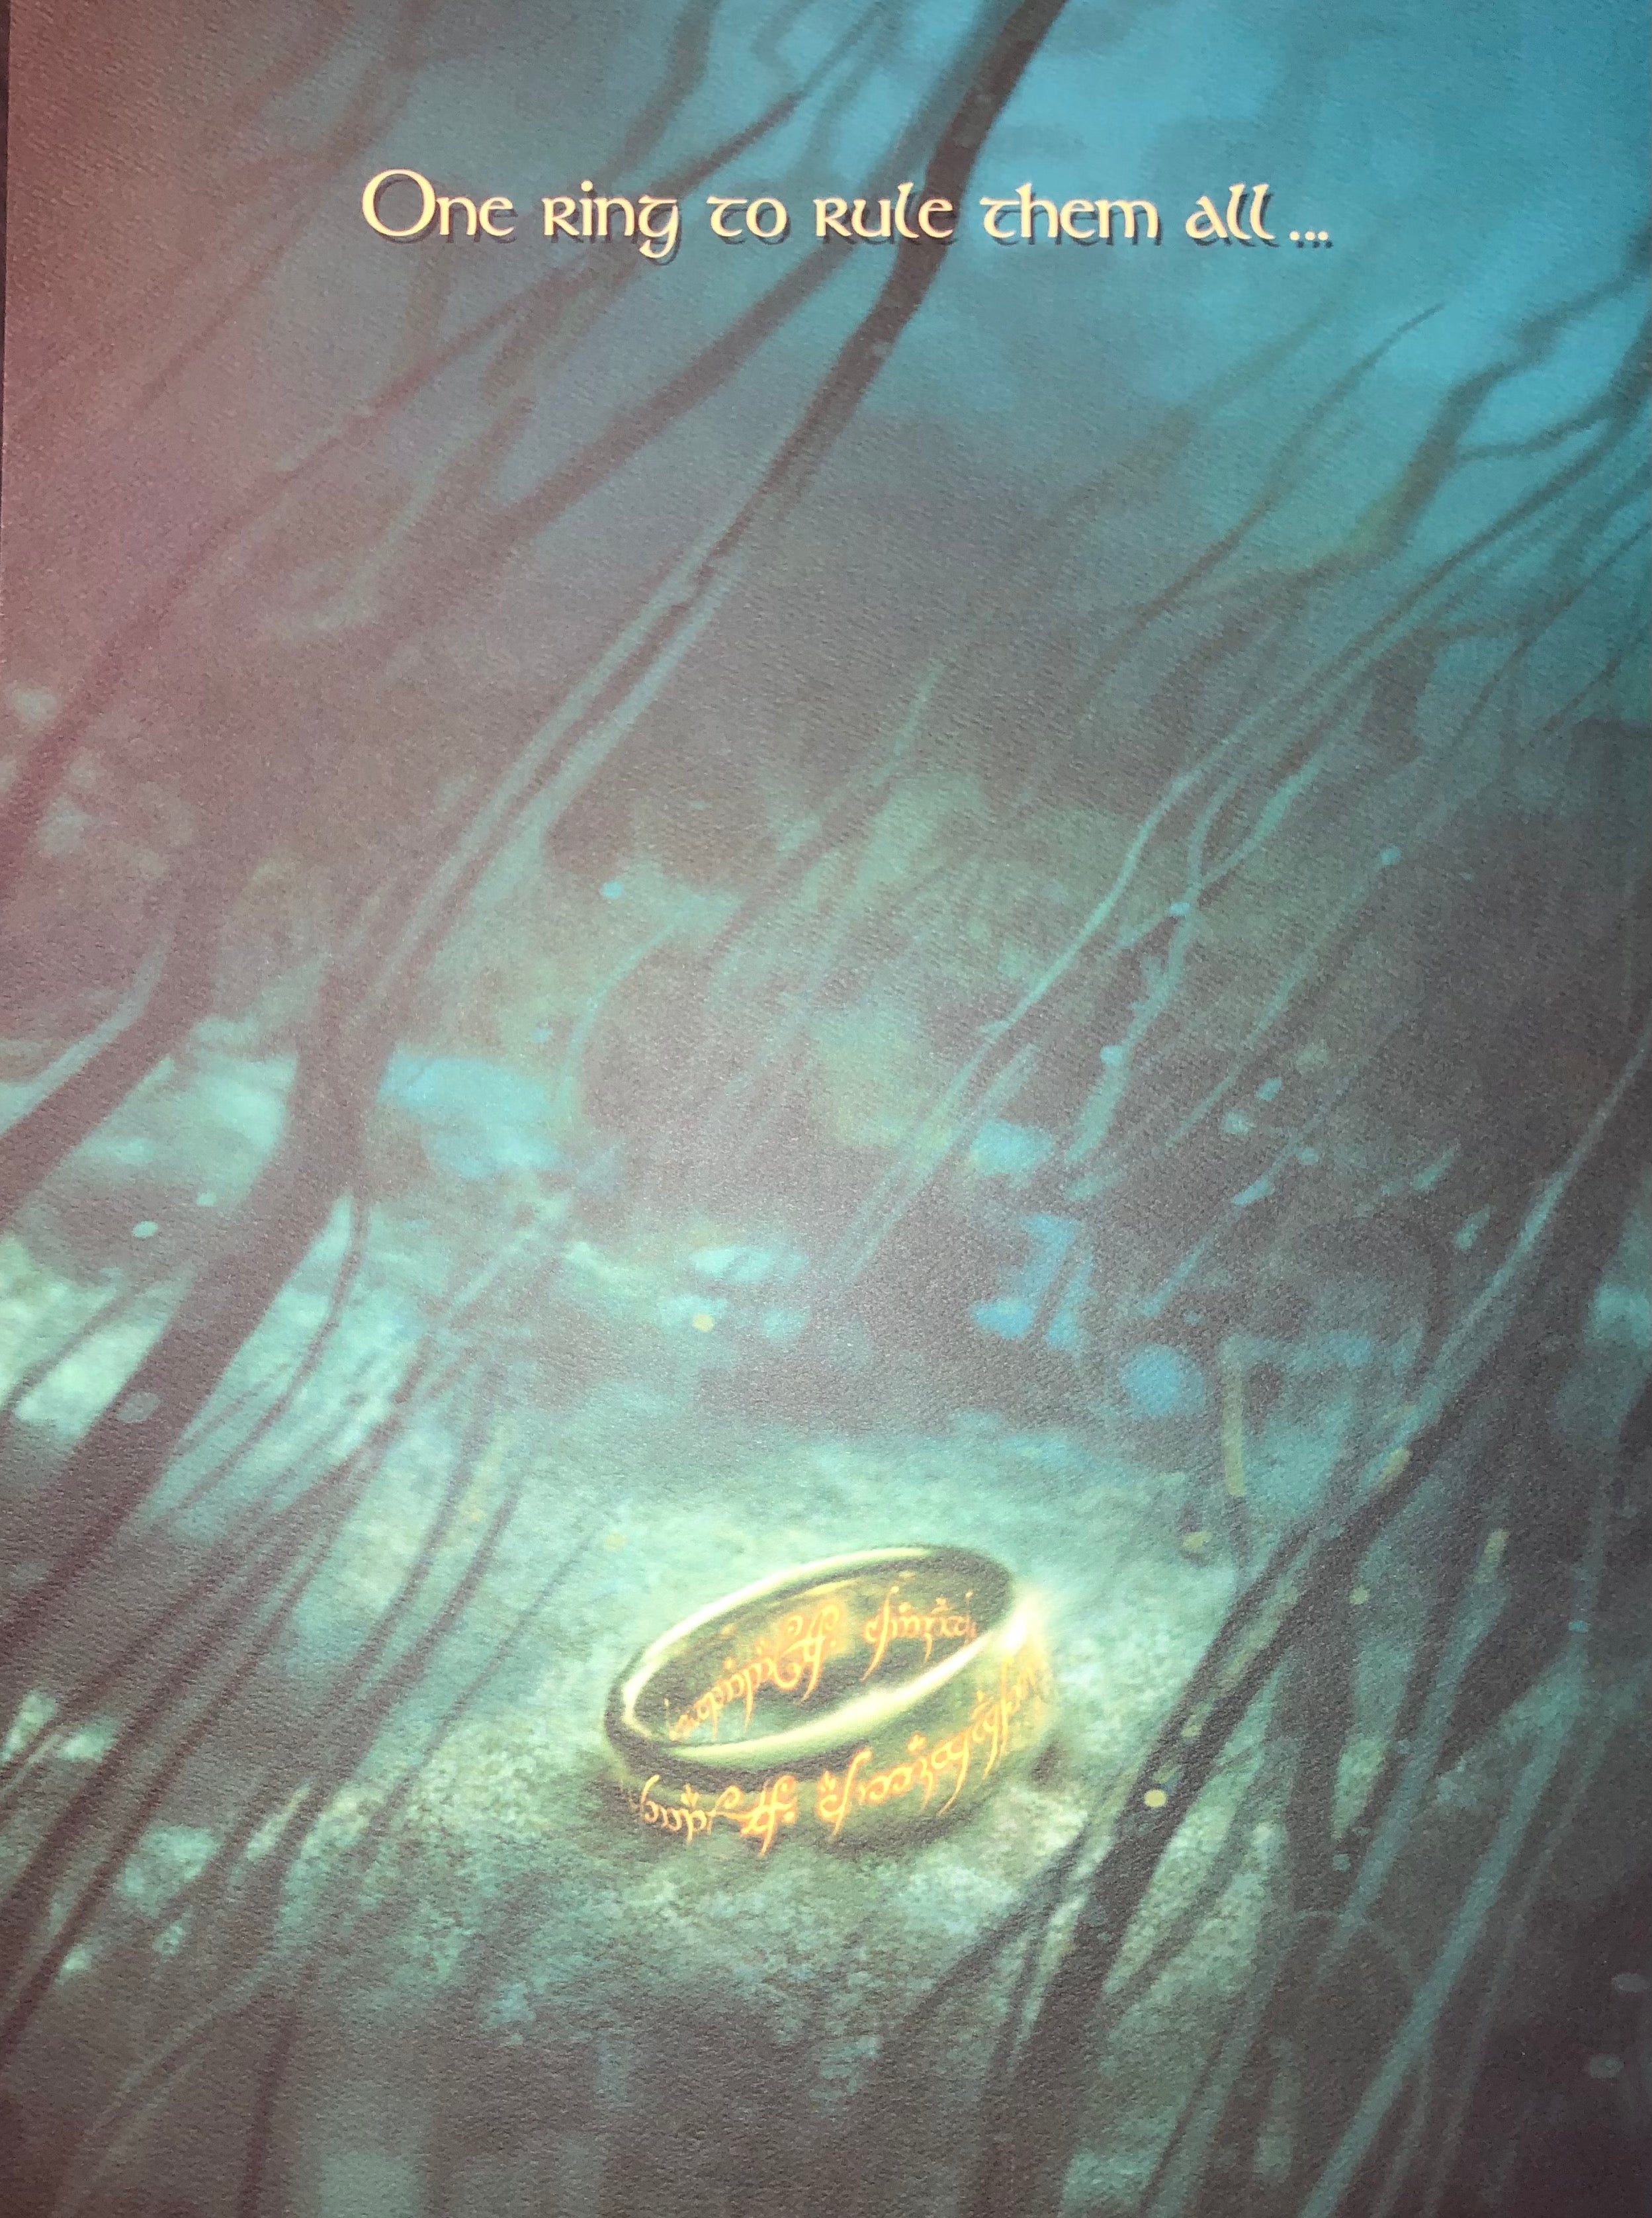 Lord of the rings ring A3 Print - The Art of Film